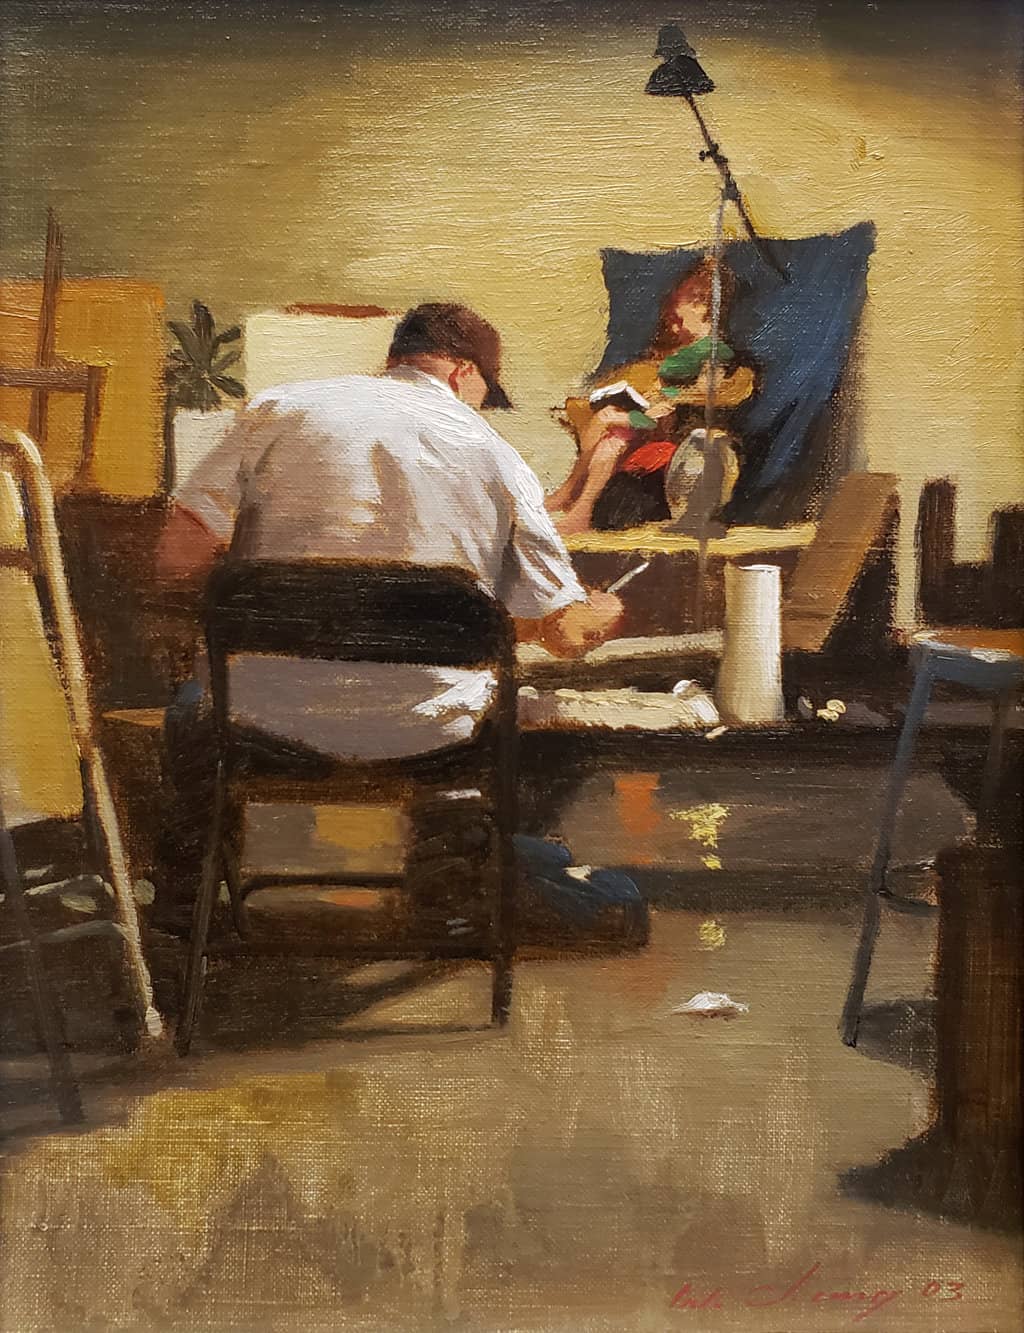 American Legacy Fine Arts presents "Classroom Clutter" a painting by Warren Chang.